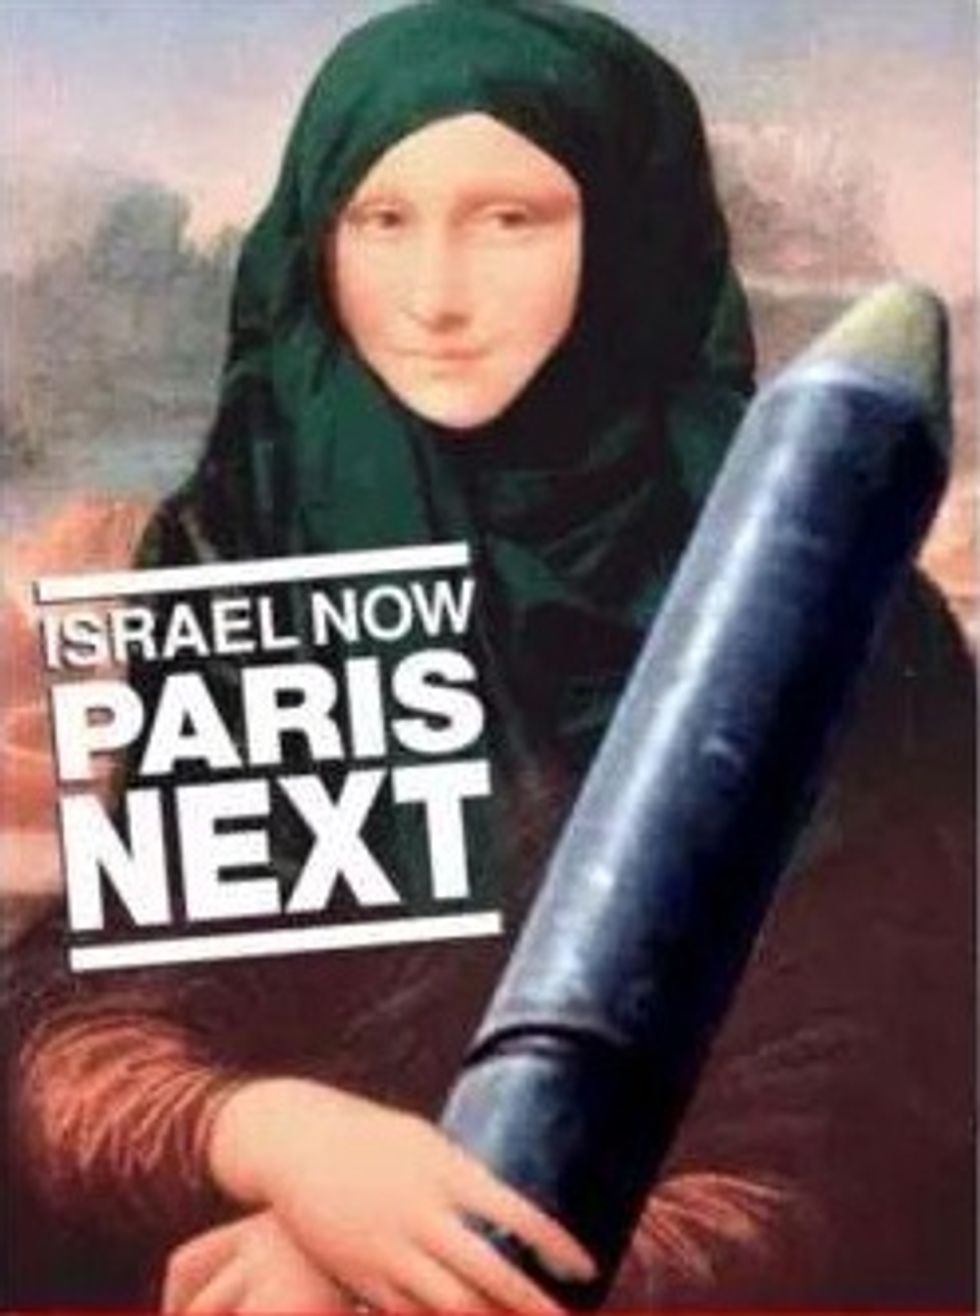 Israeli Embassy Tweets, Then Deletes, Image of 'Mona Lisa' in a Headscarf With a Missile